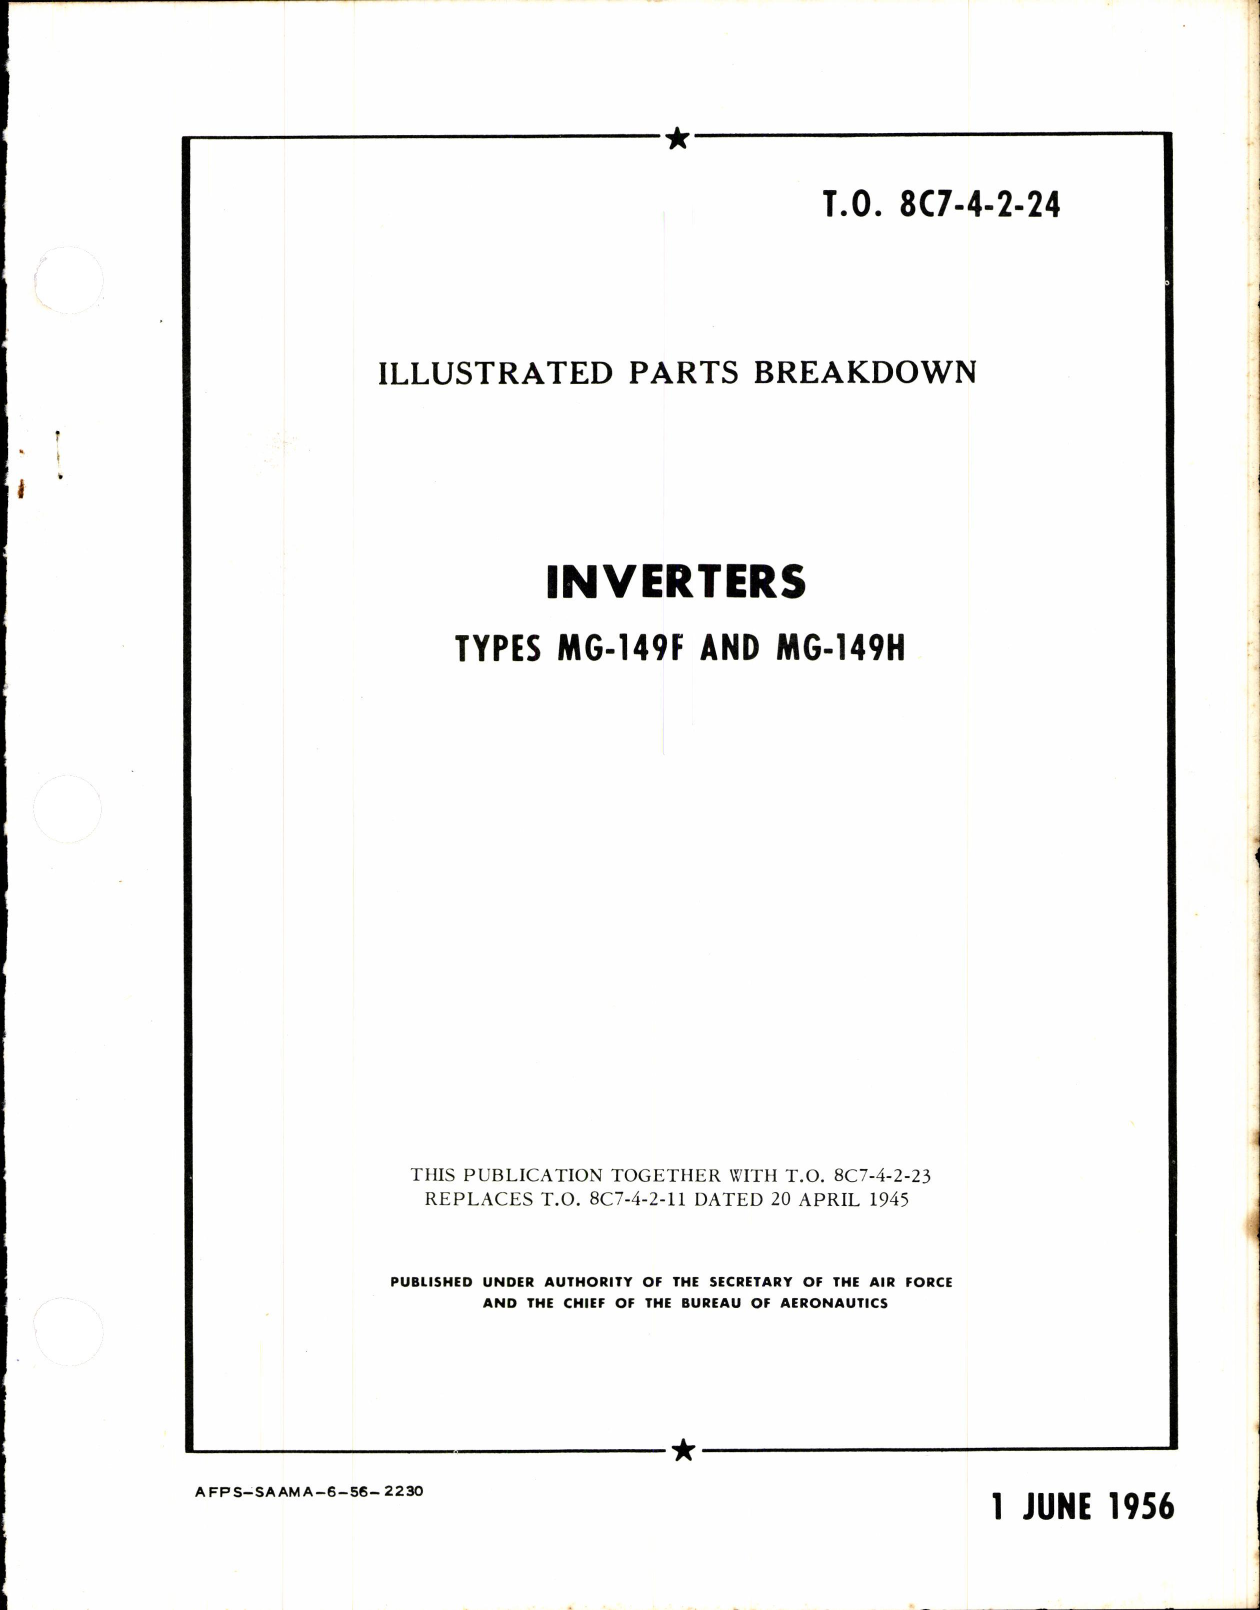 Sample page 1 from AirCorps Library document: Parts Breakdown for Inverters Types MG-149F & MG-149H